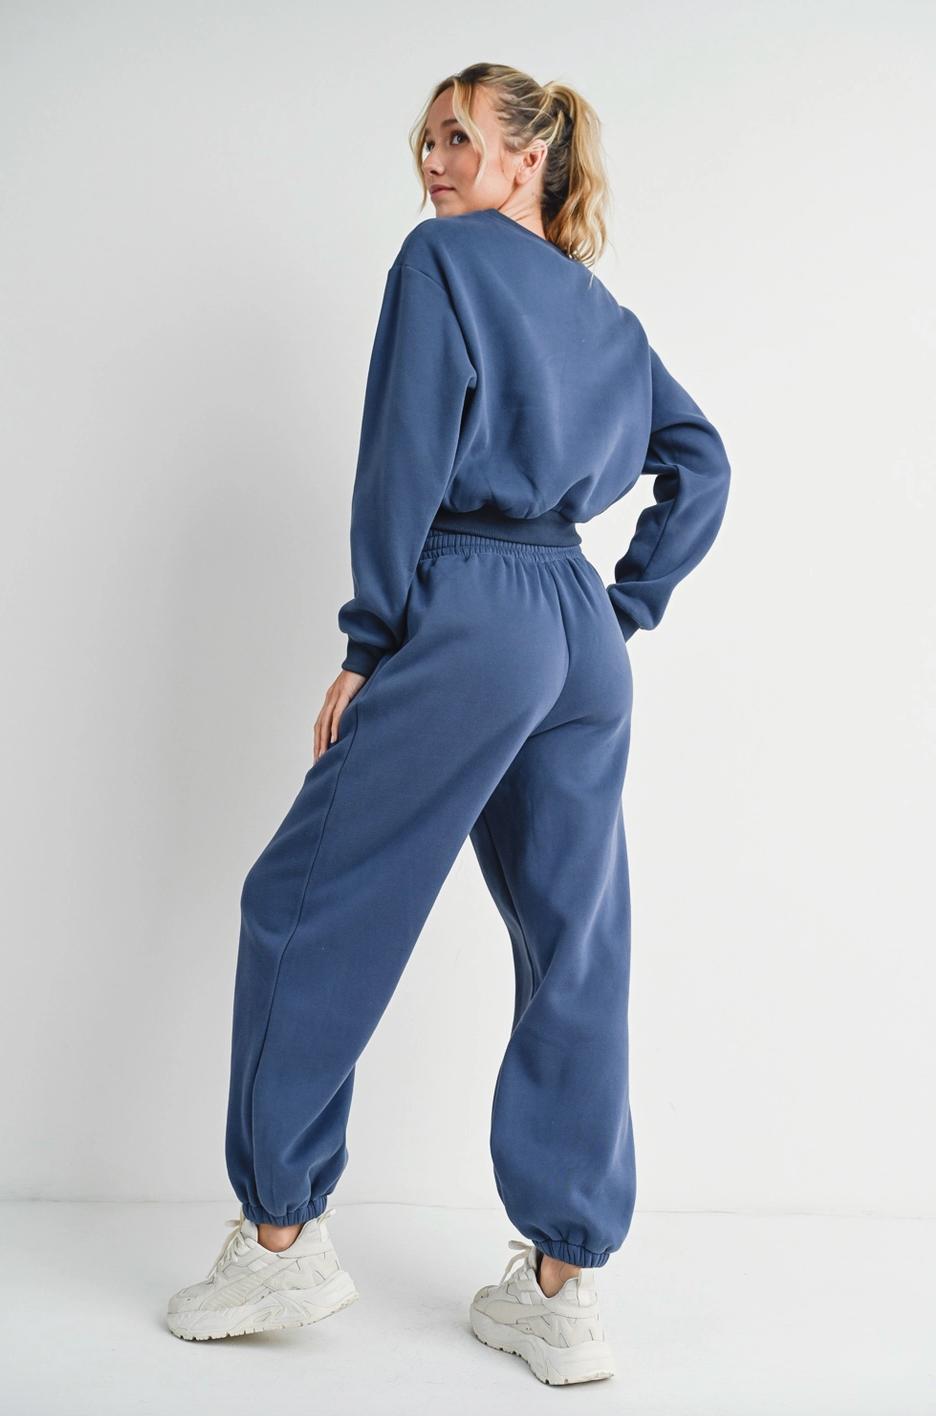 Layover Cropped Jogger Set - Blue